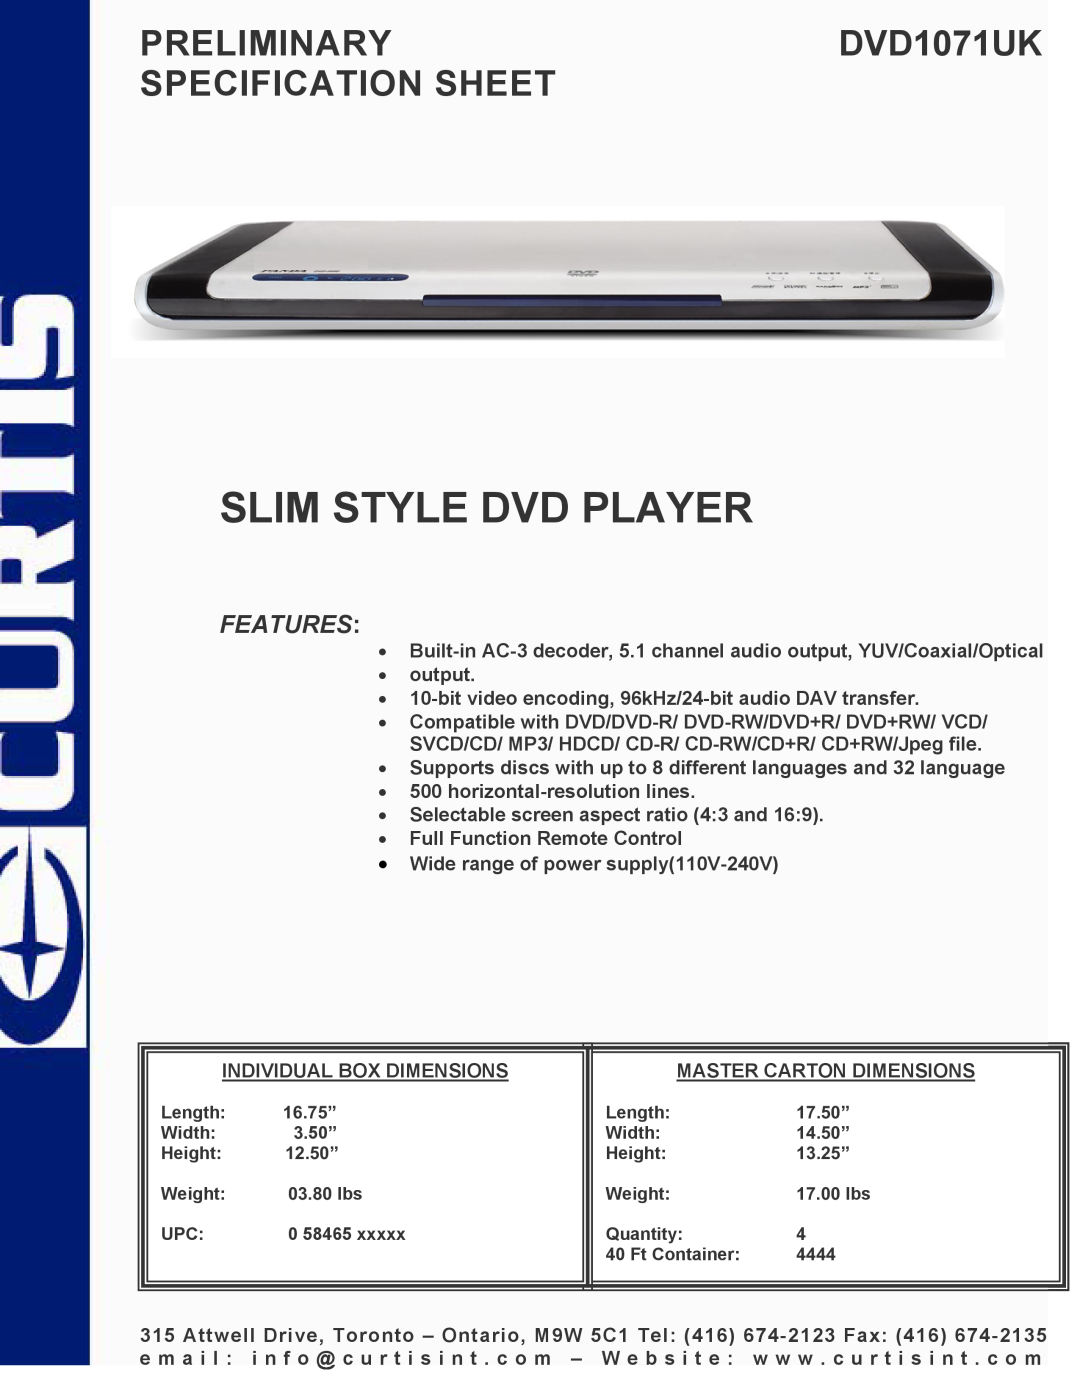 Curtis specifications Slim Style Dvd Player, PRELIMINARYDVD1071UK SPECIFICATION SHEET, Features 